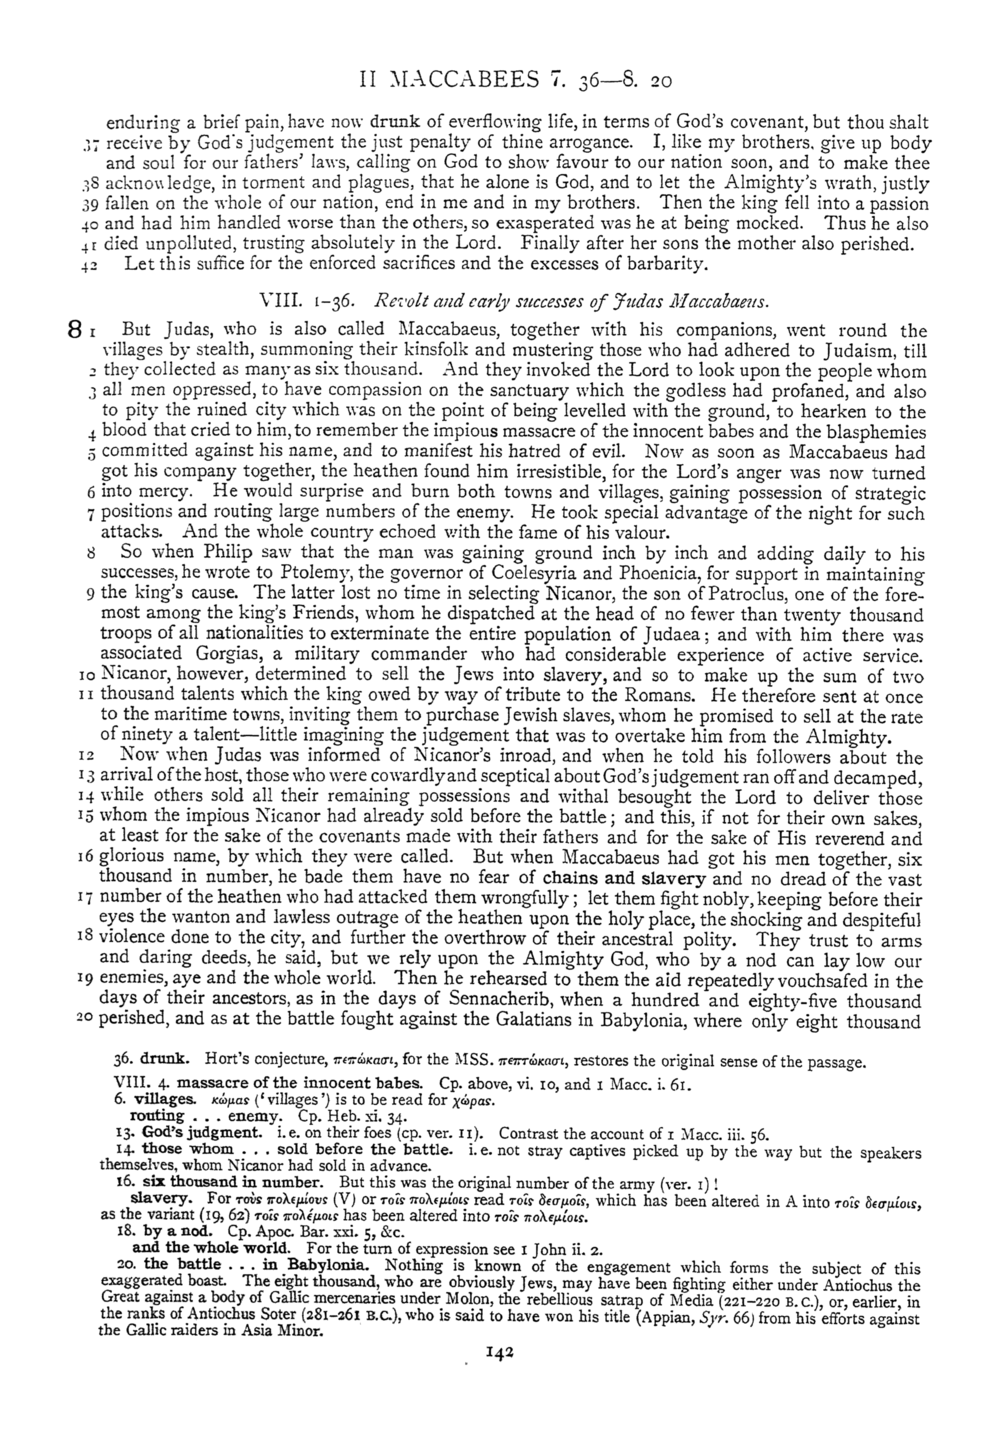 Image of page 142